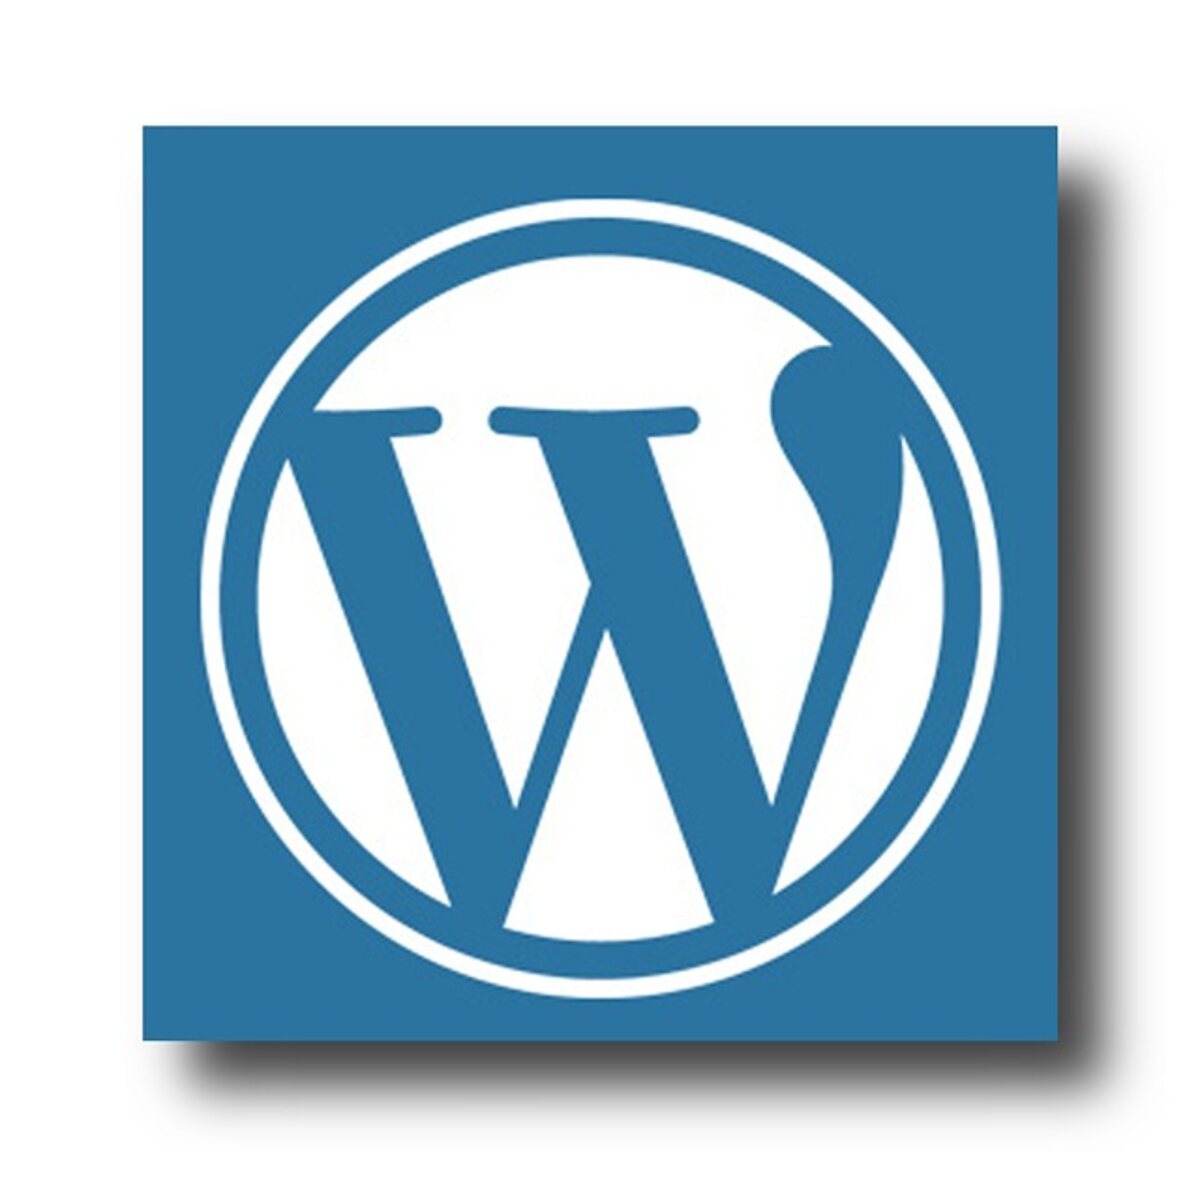 How to Install a WordPress Theme